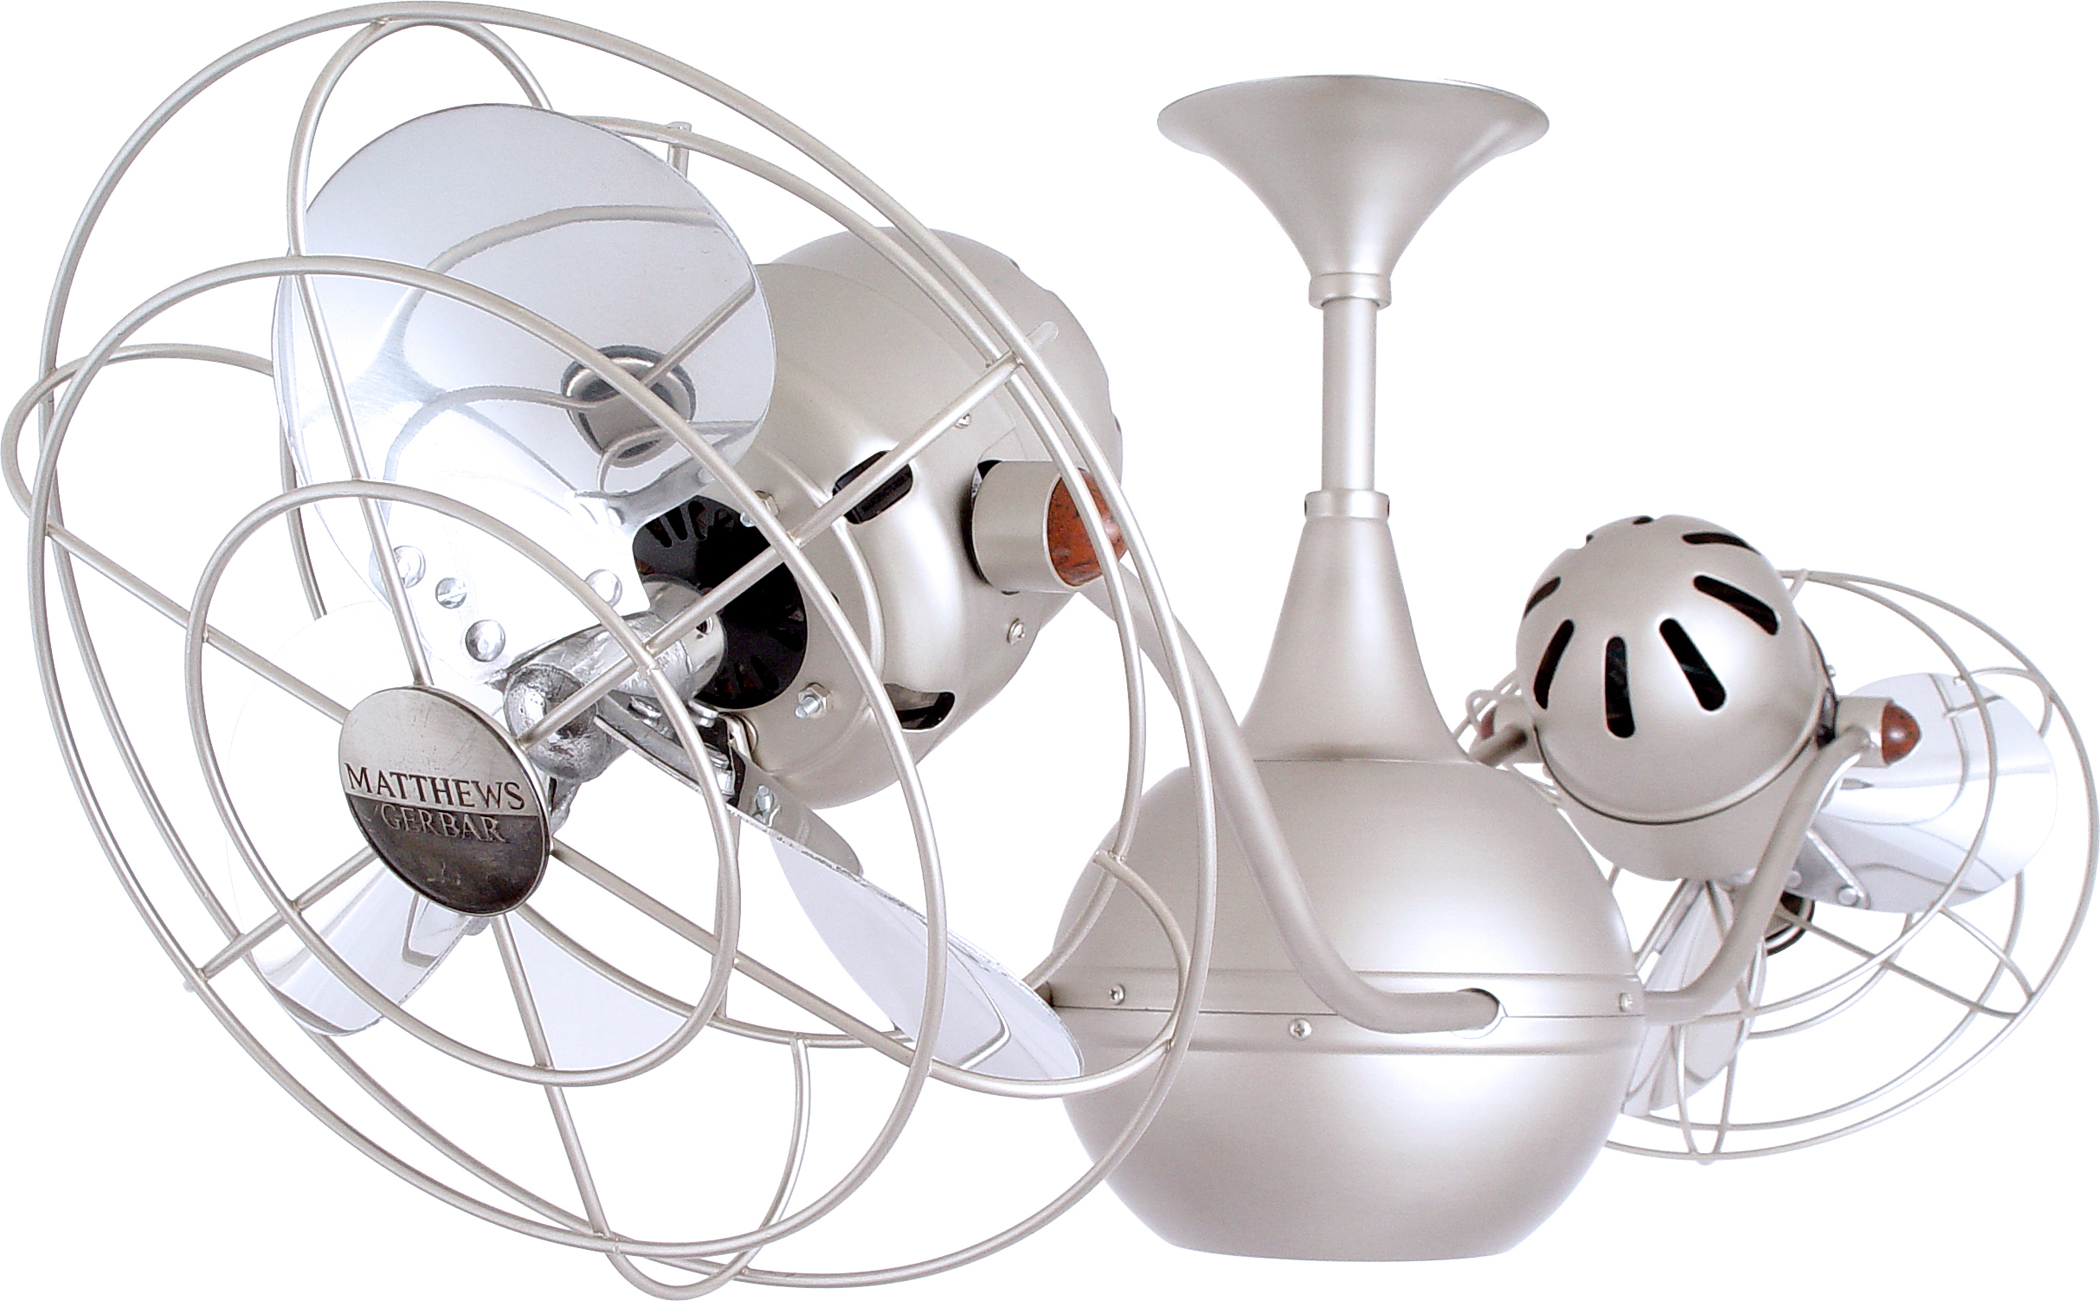 Vent-Bettina Rotational Dual Head Ceiling Fan in Brushed Nickel Finish with Metal Blades and Decorative Cage